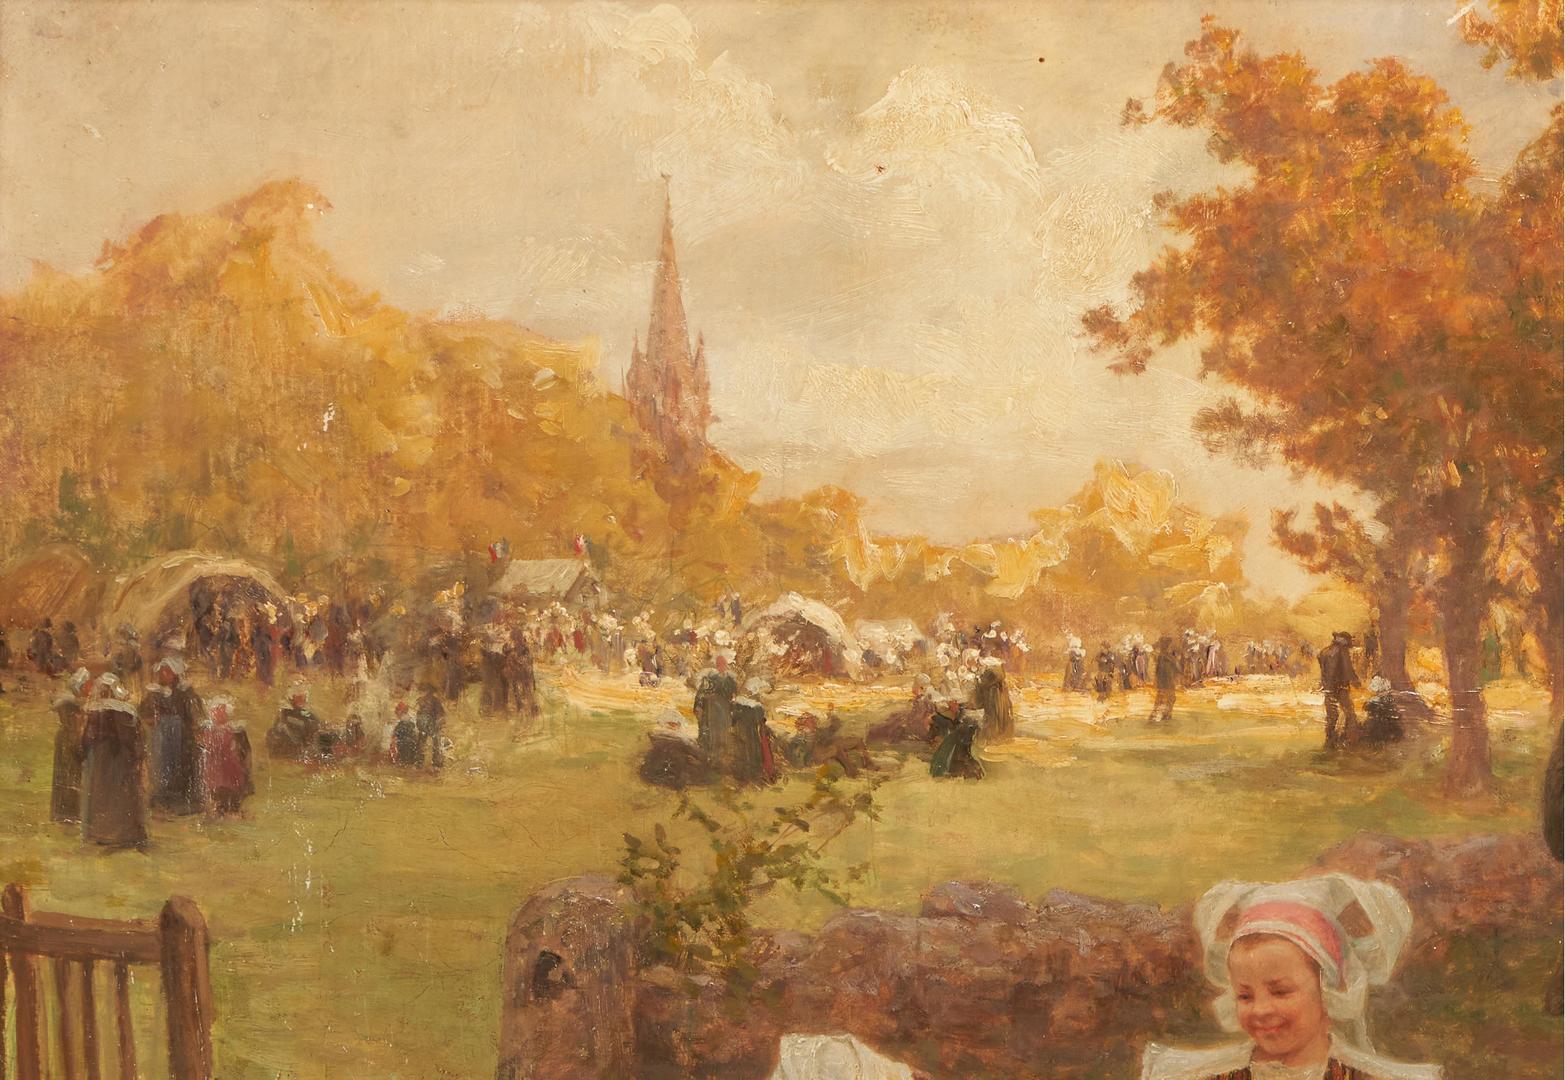 Lot 178: Theophile Louis Deyrolle O/C Painting, Cider Festival